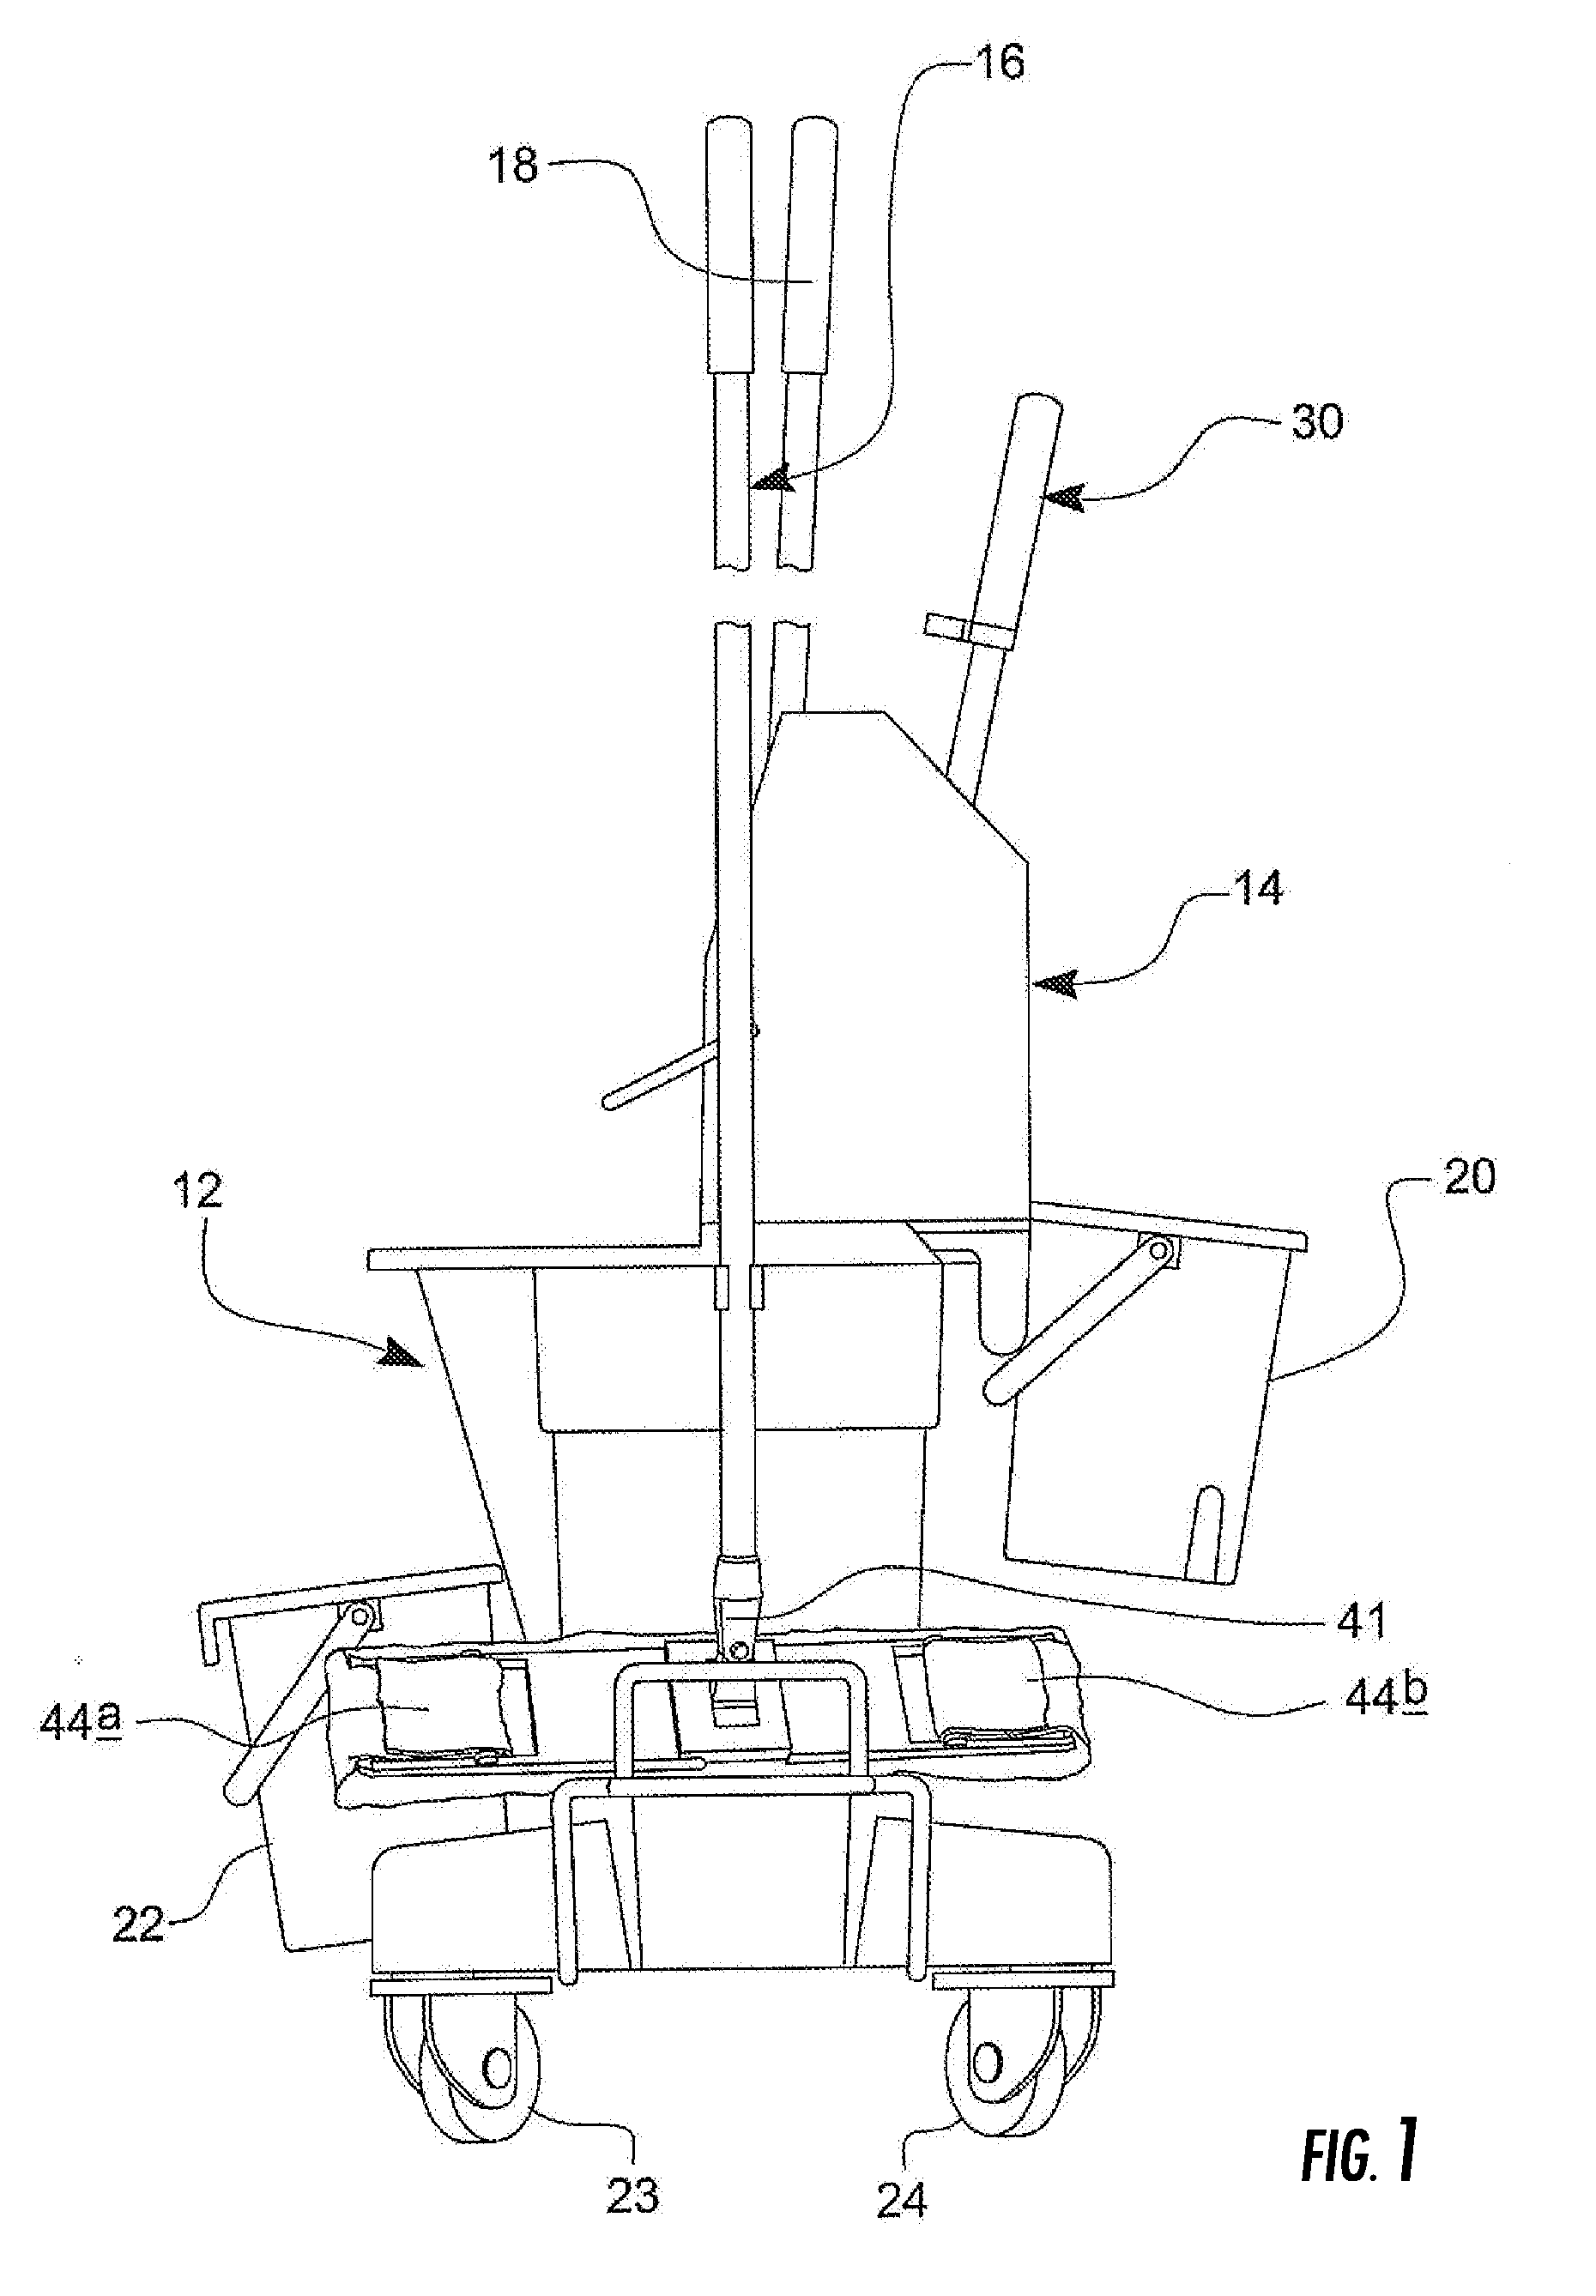 Method of and Apparatus for Cleaning a Floor